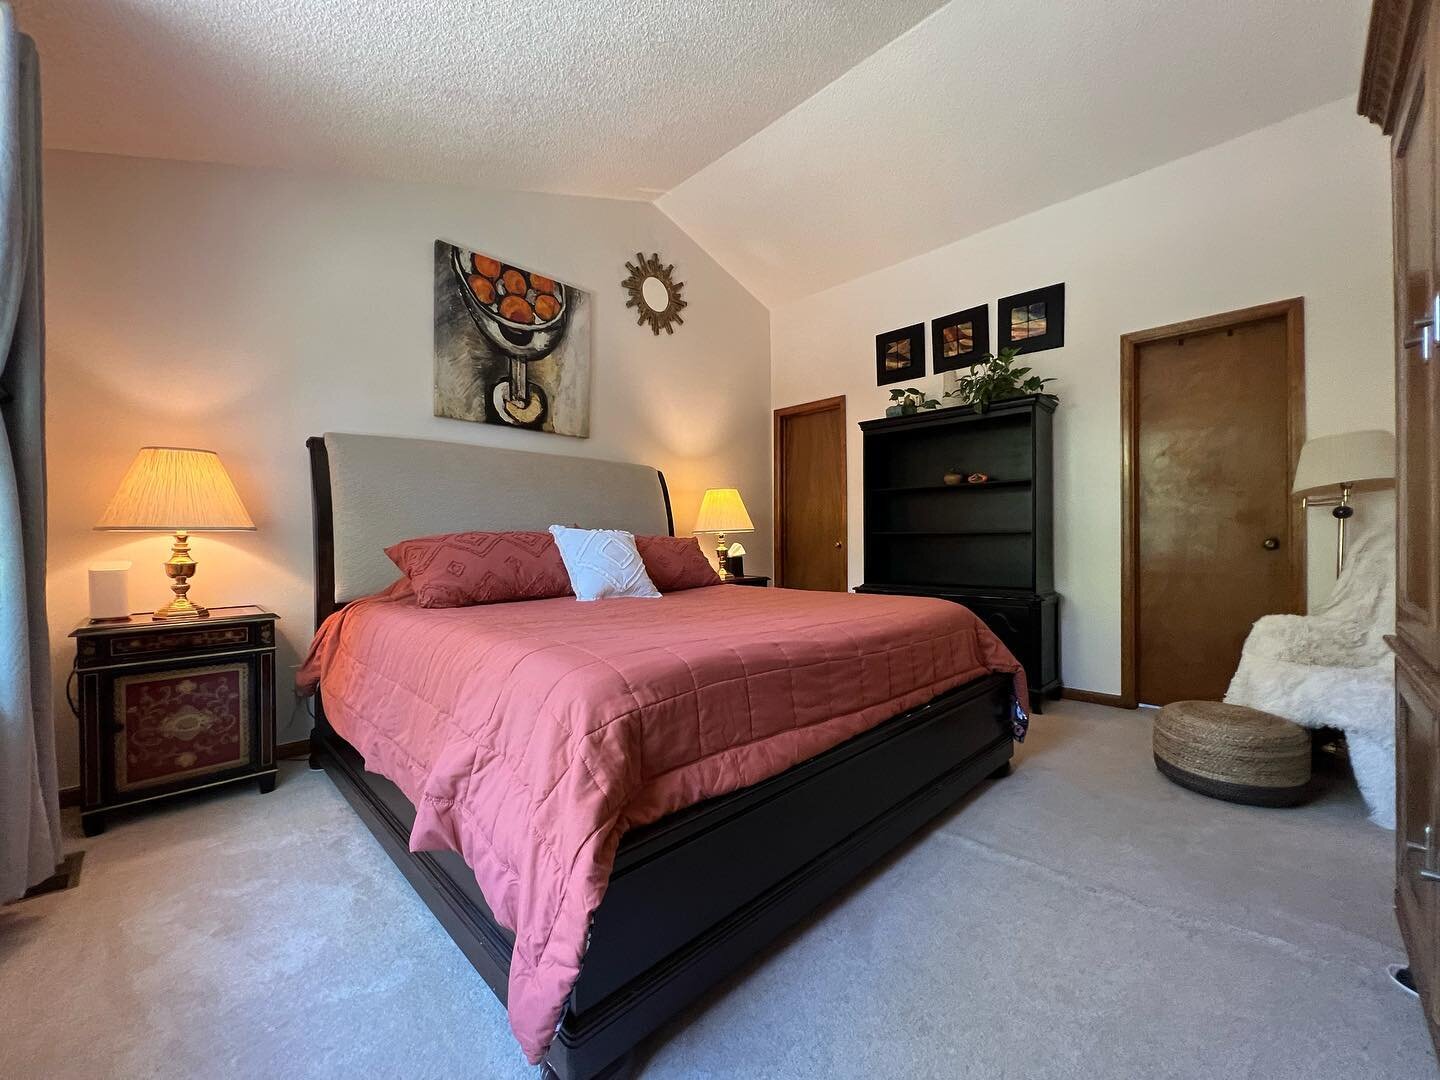 Hey Boulder/Denver area peeps! I&rsquo;m looking for a roommate 🤗👍 I&rsquo;m in  Westminster. Renting the primary sulfite (share the main floor) great yard. Only 15 miles from Boulder or Denver. $1500 includes utilities. DM me if you&rsquo;re inter